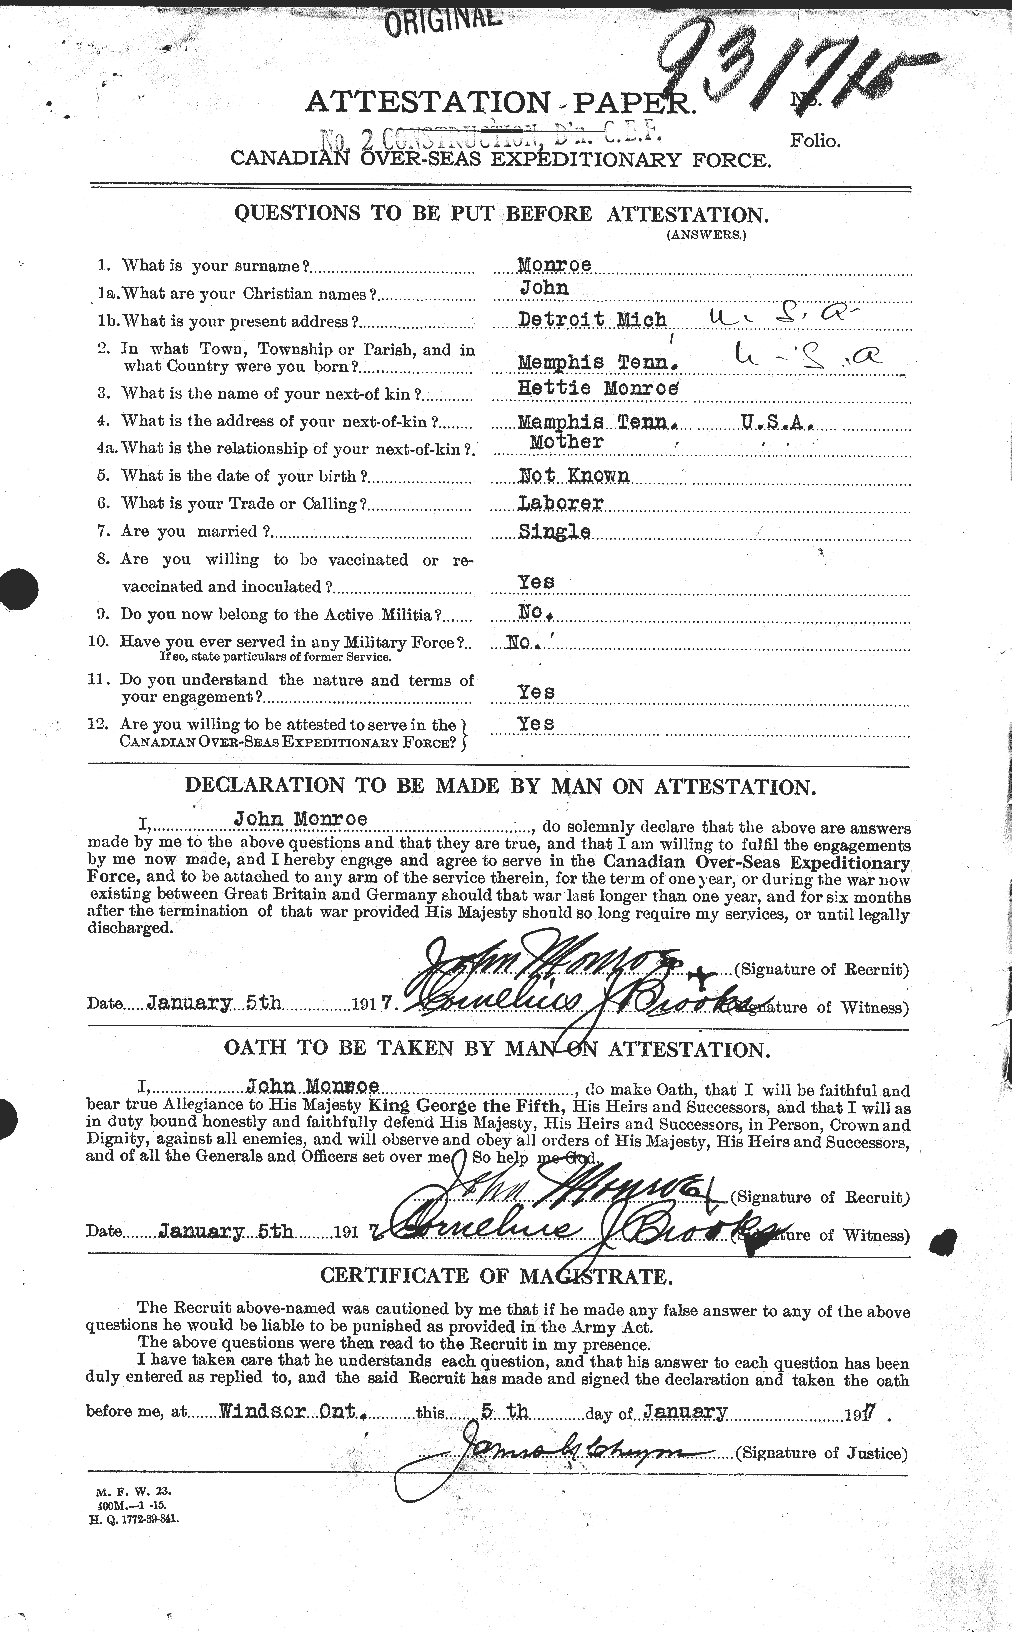 Personnel Records of the First World War - CEF 500128a